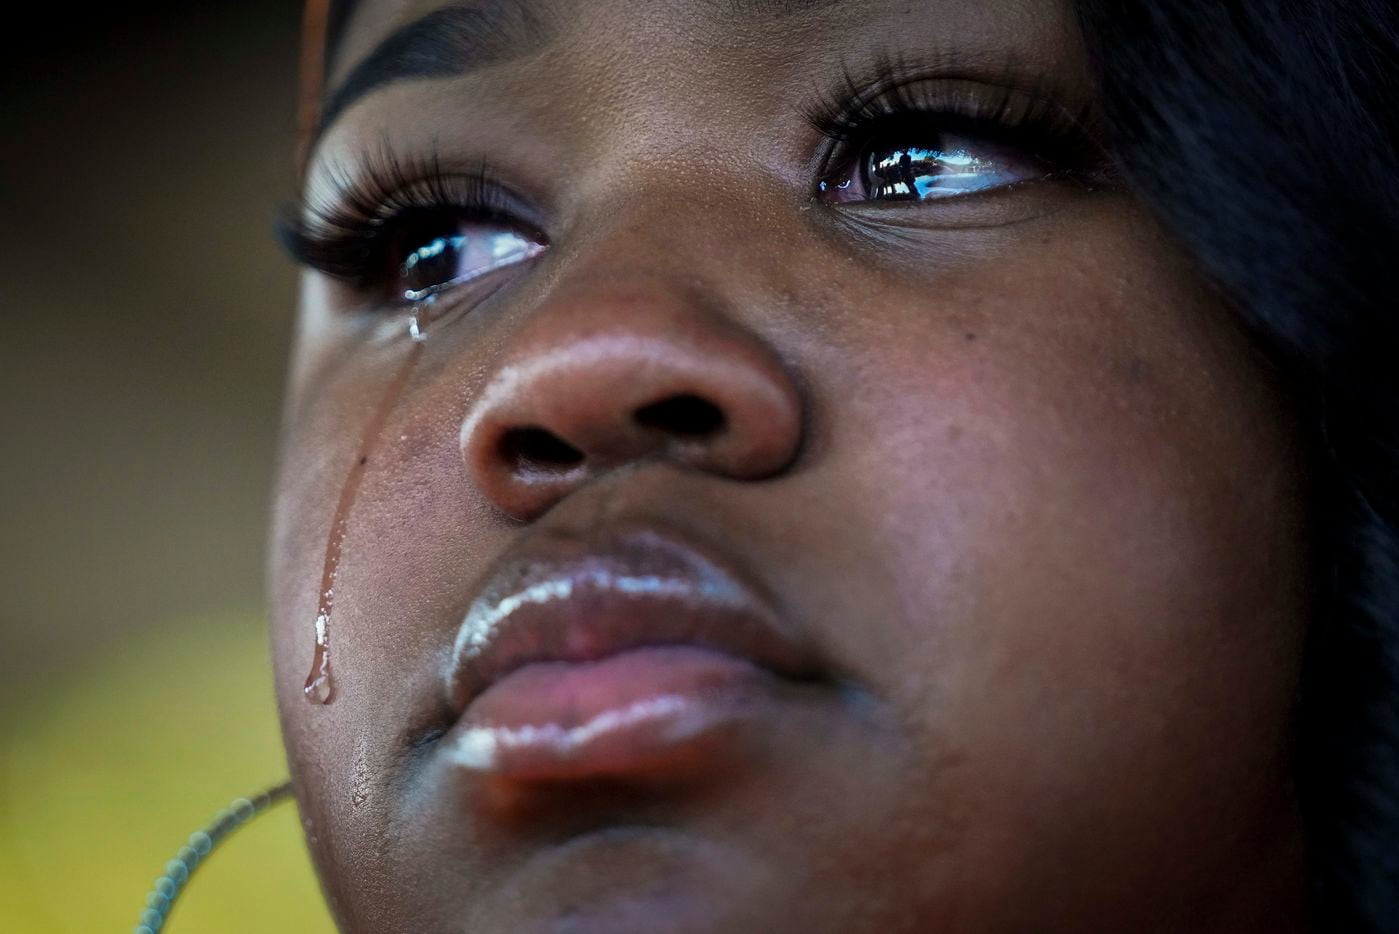 A tear runs down the cheek of MacKenzie Mitchell, one of the protest organizers, during a...